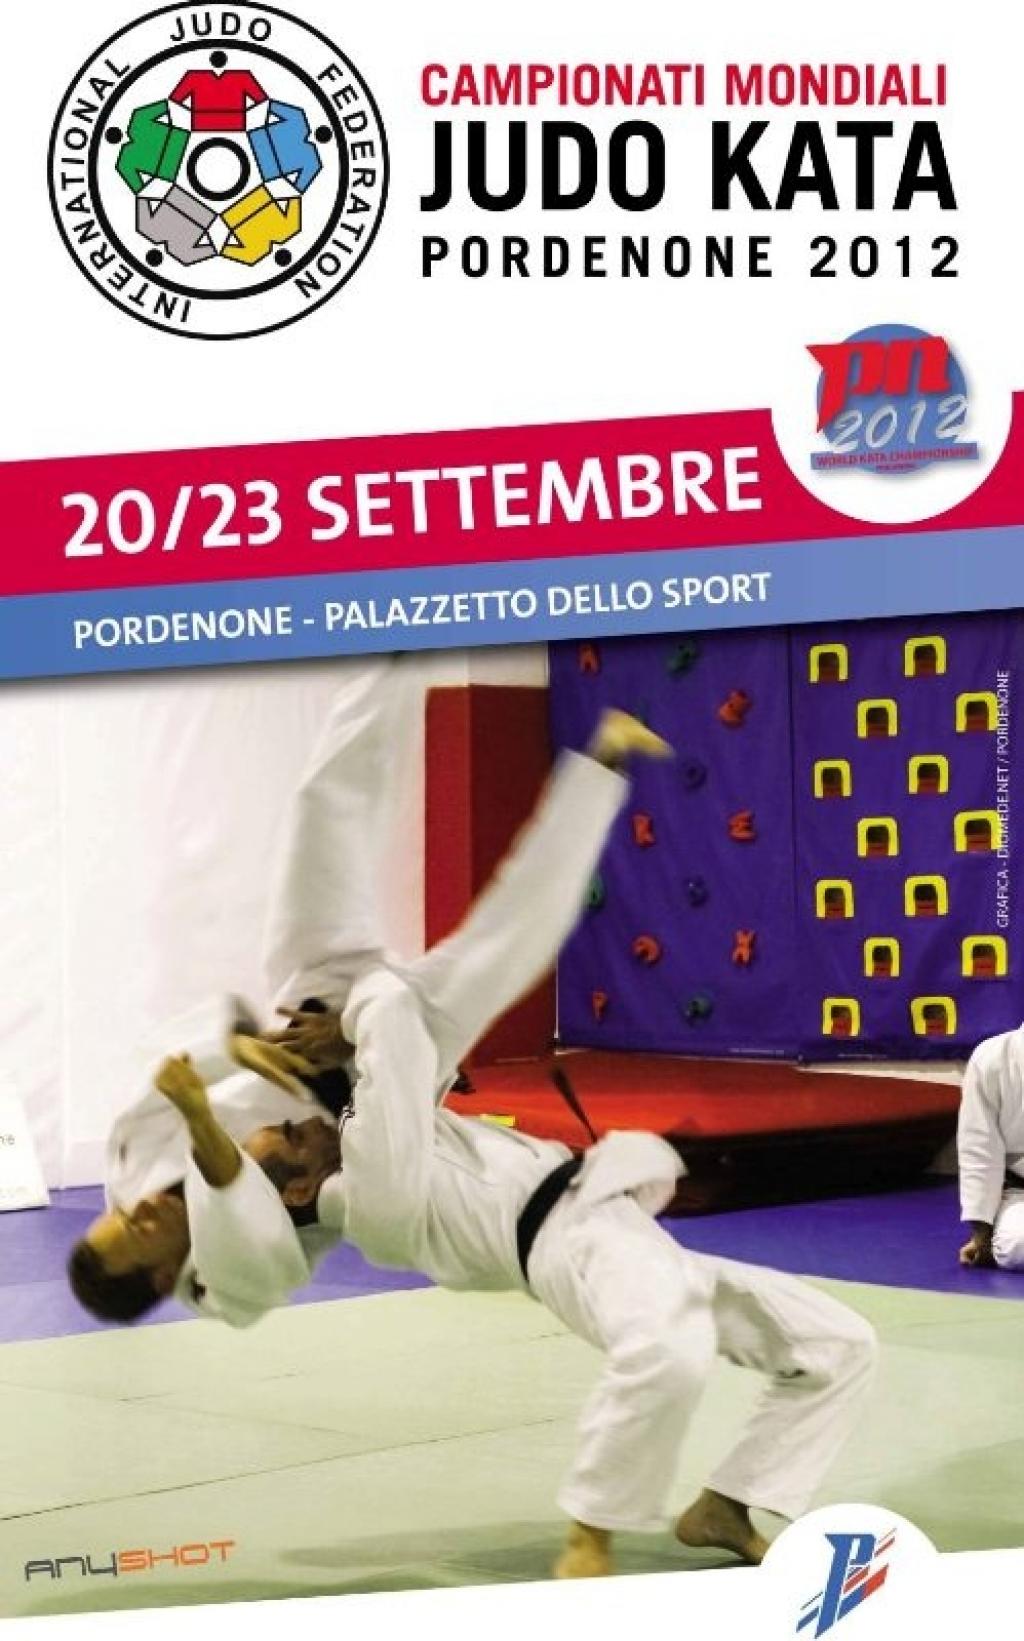 132 pairs from 33 Nations in the 4th kata World Championships